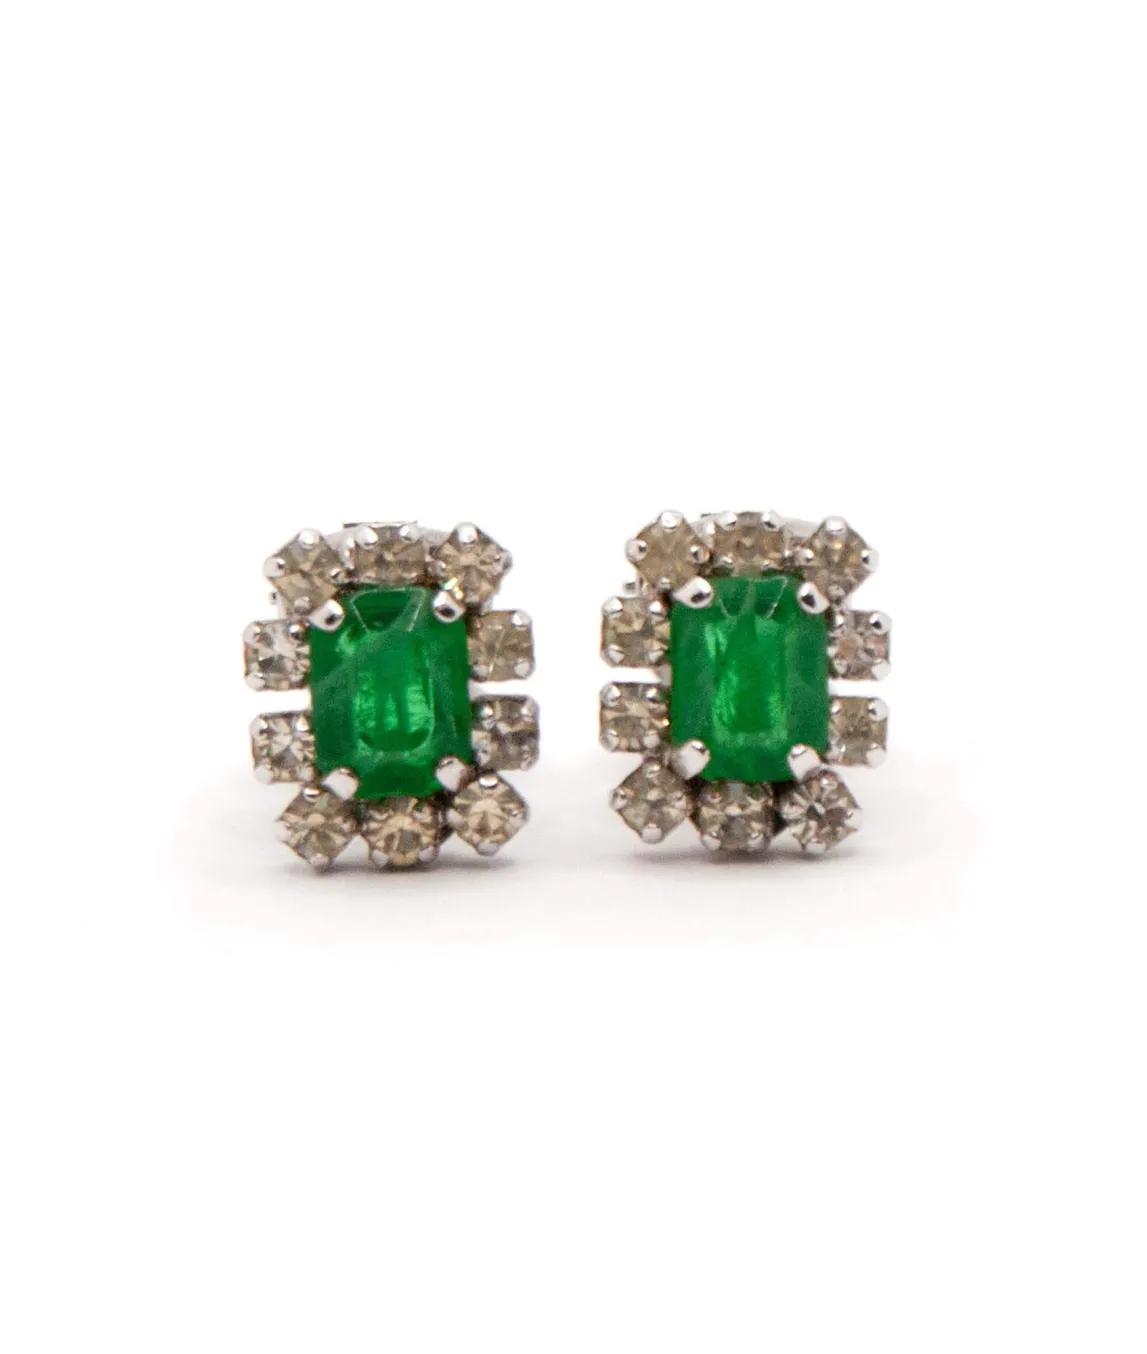 Christian Dior vintage ear clips flawed emerald glass with rhinestone clusters